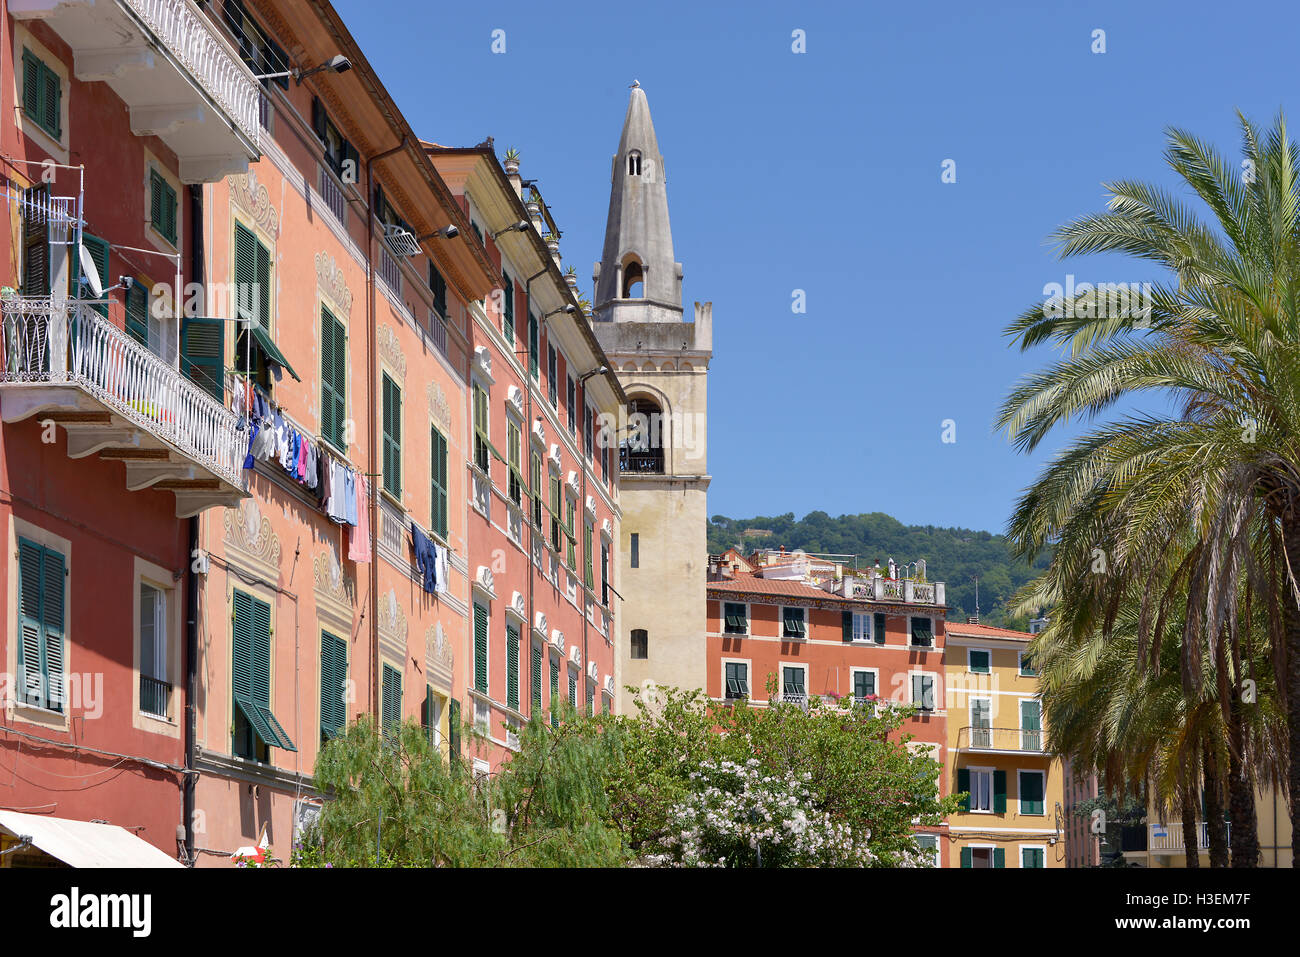 Town of Lerici in Italy Stock Photo